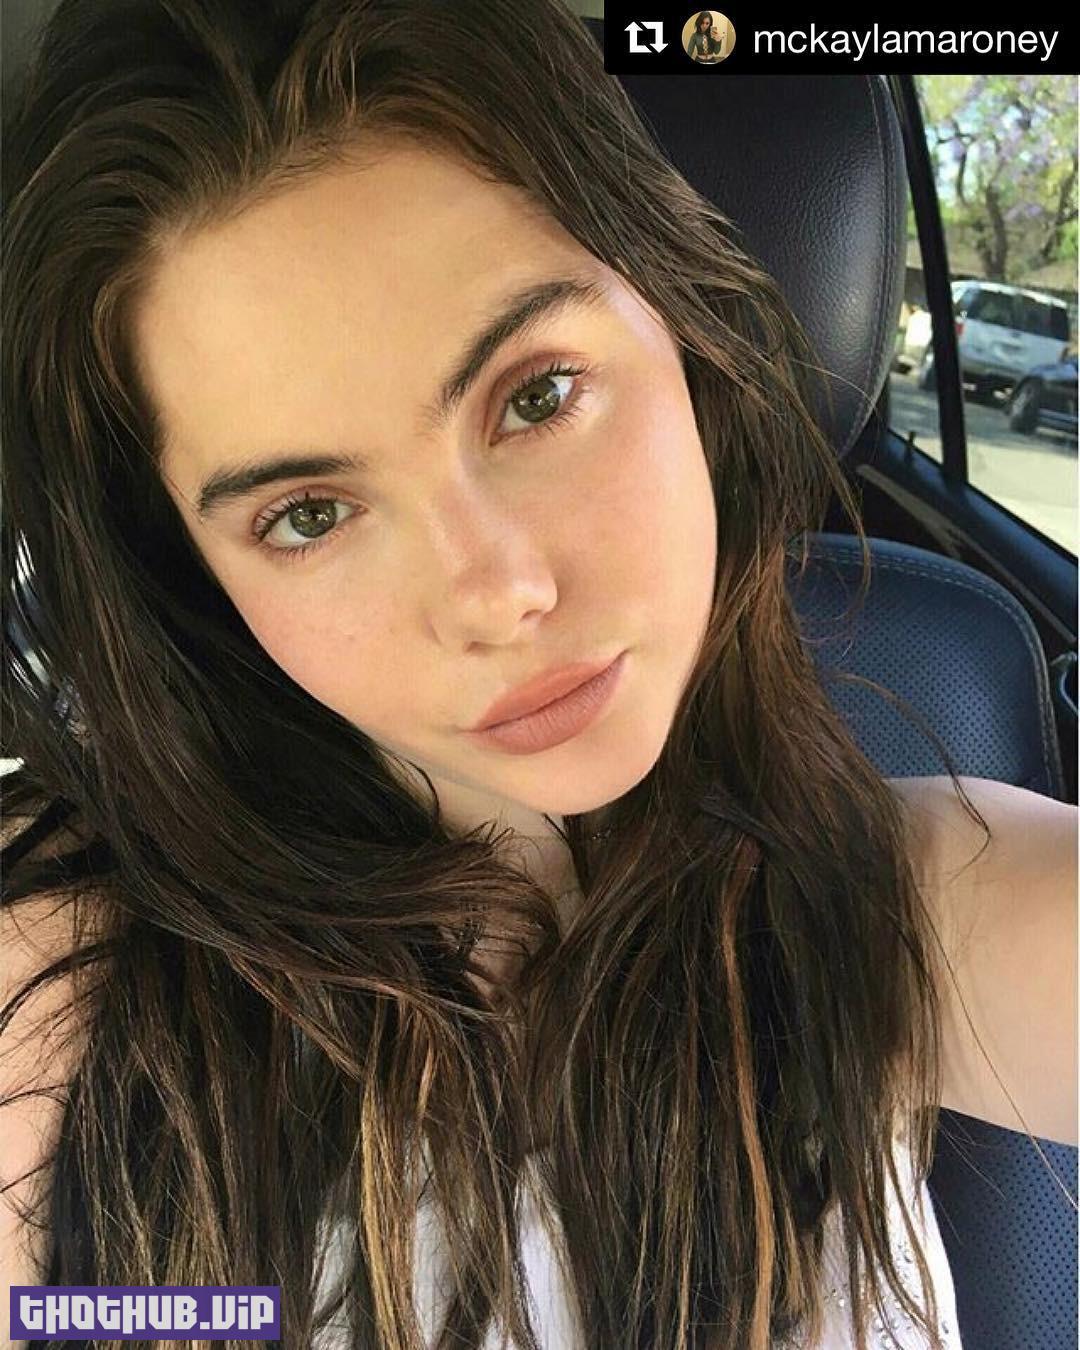 1690568873 631 McKayla Maroney Sexy and%E2%80%A6 Abused 38 Photos